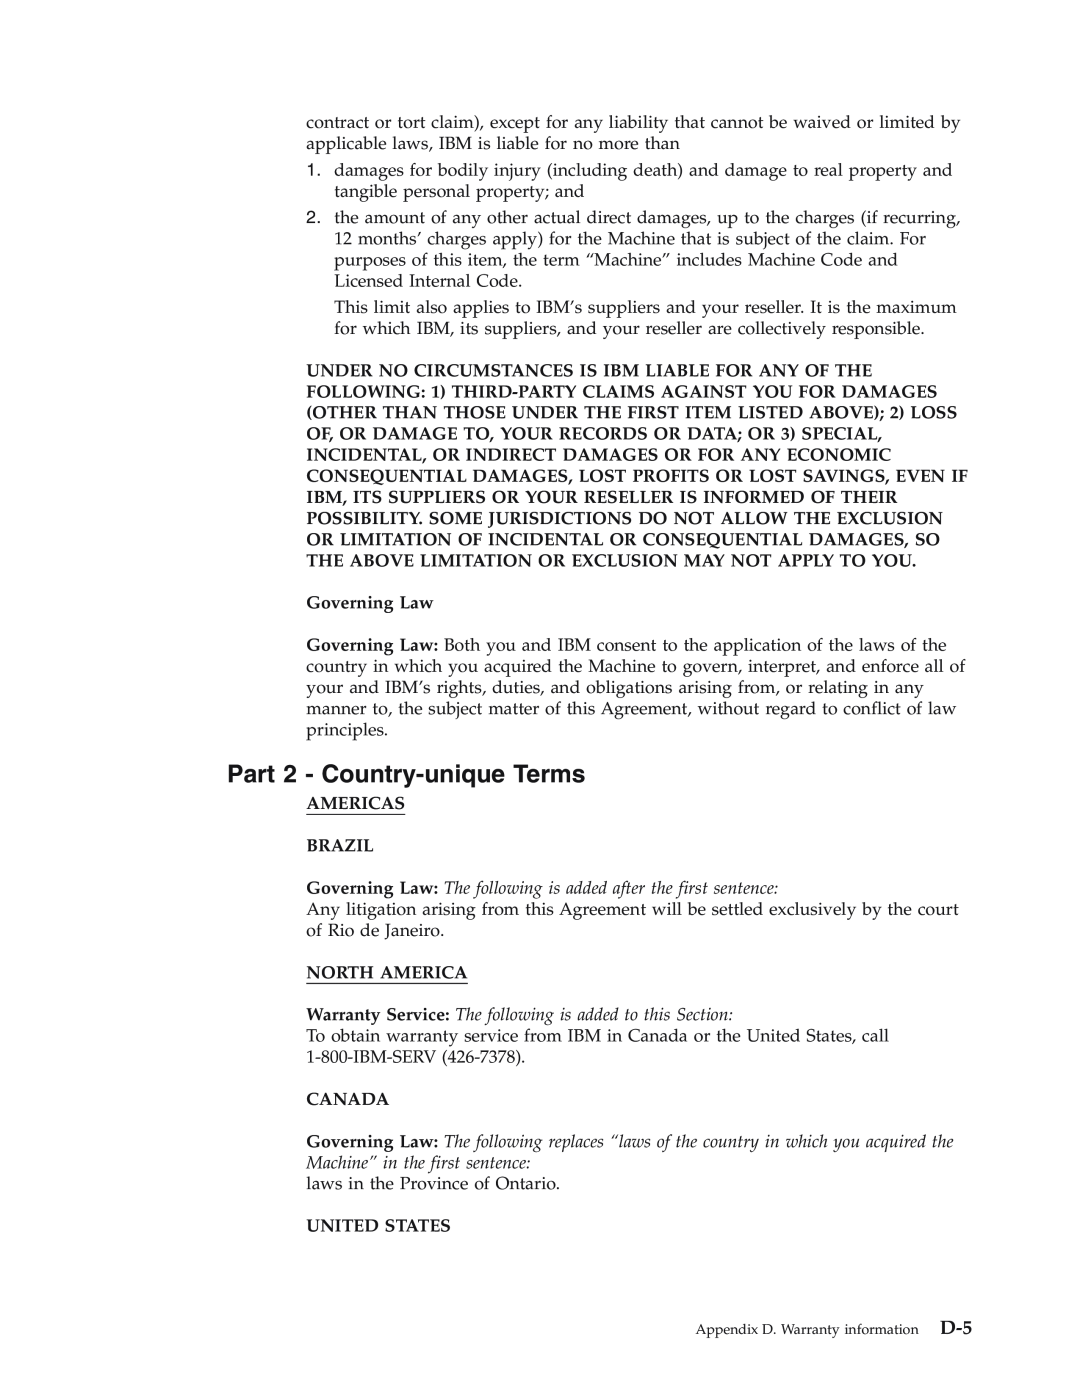 IBM Partner Pavilion iLV300 manual Part 2 - Country-unique Terms, Governing Law, Americas Brazil, North America, Canada 